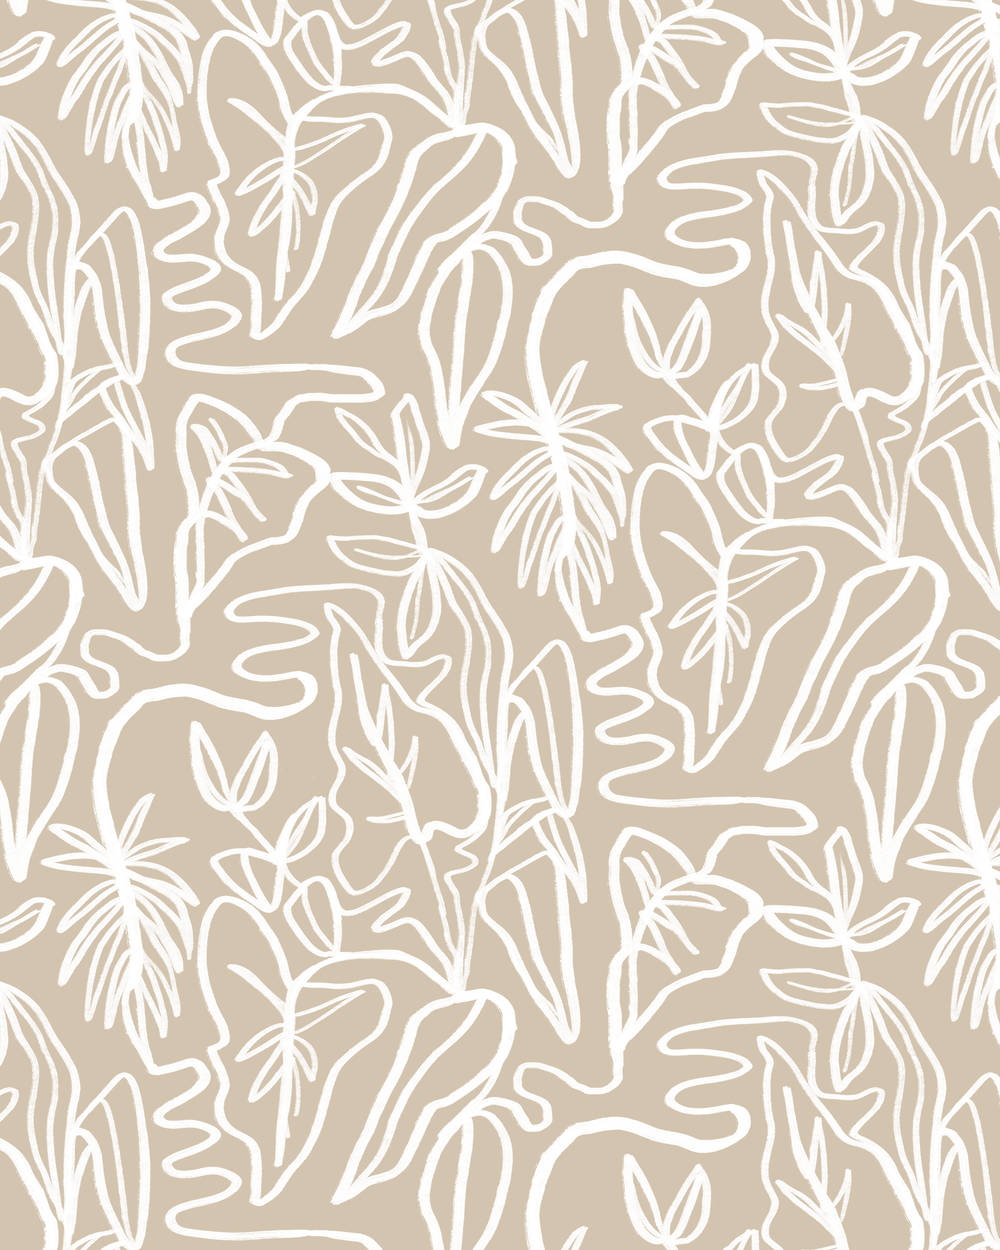 Neutral Iphone Leaf Abstract Wallpaper